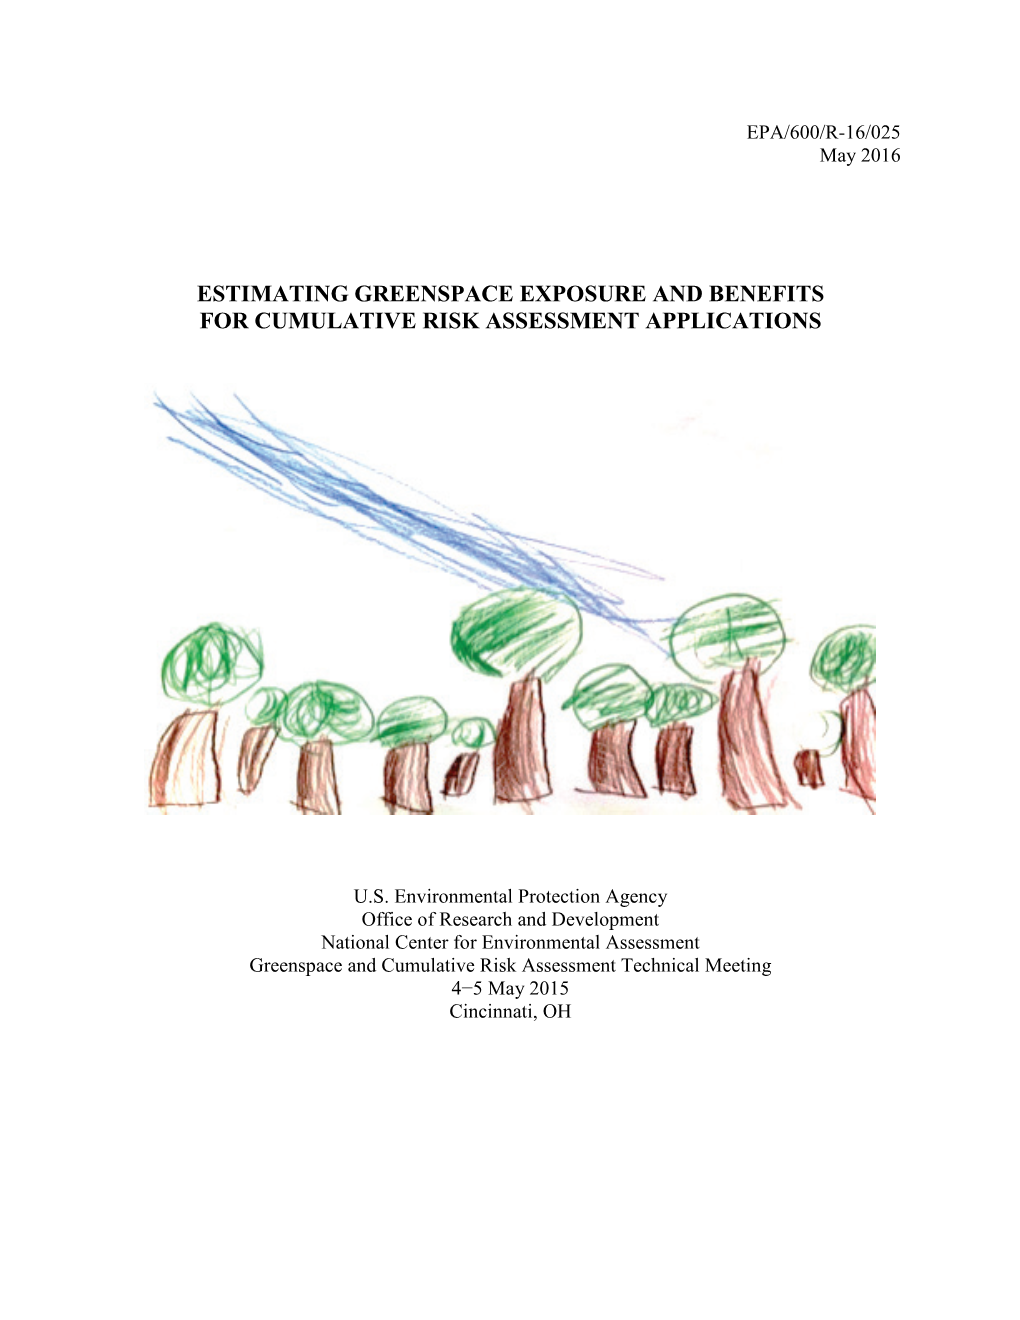 Estimating Greenspace Exposure and Benefits for Cumulative Risk Assessment Applications